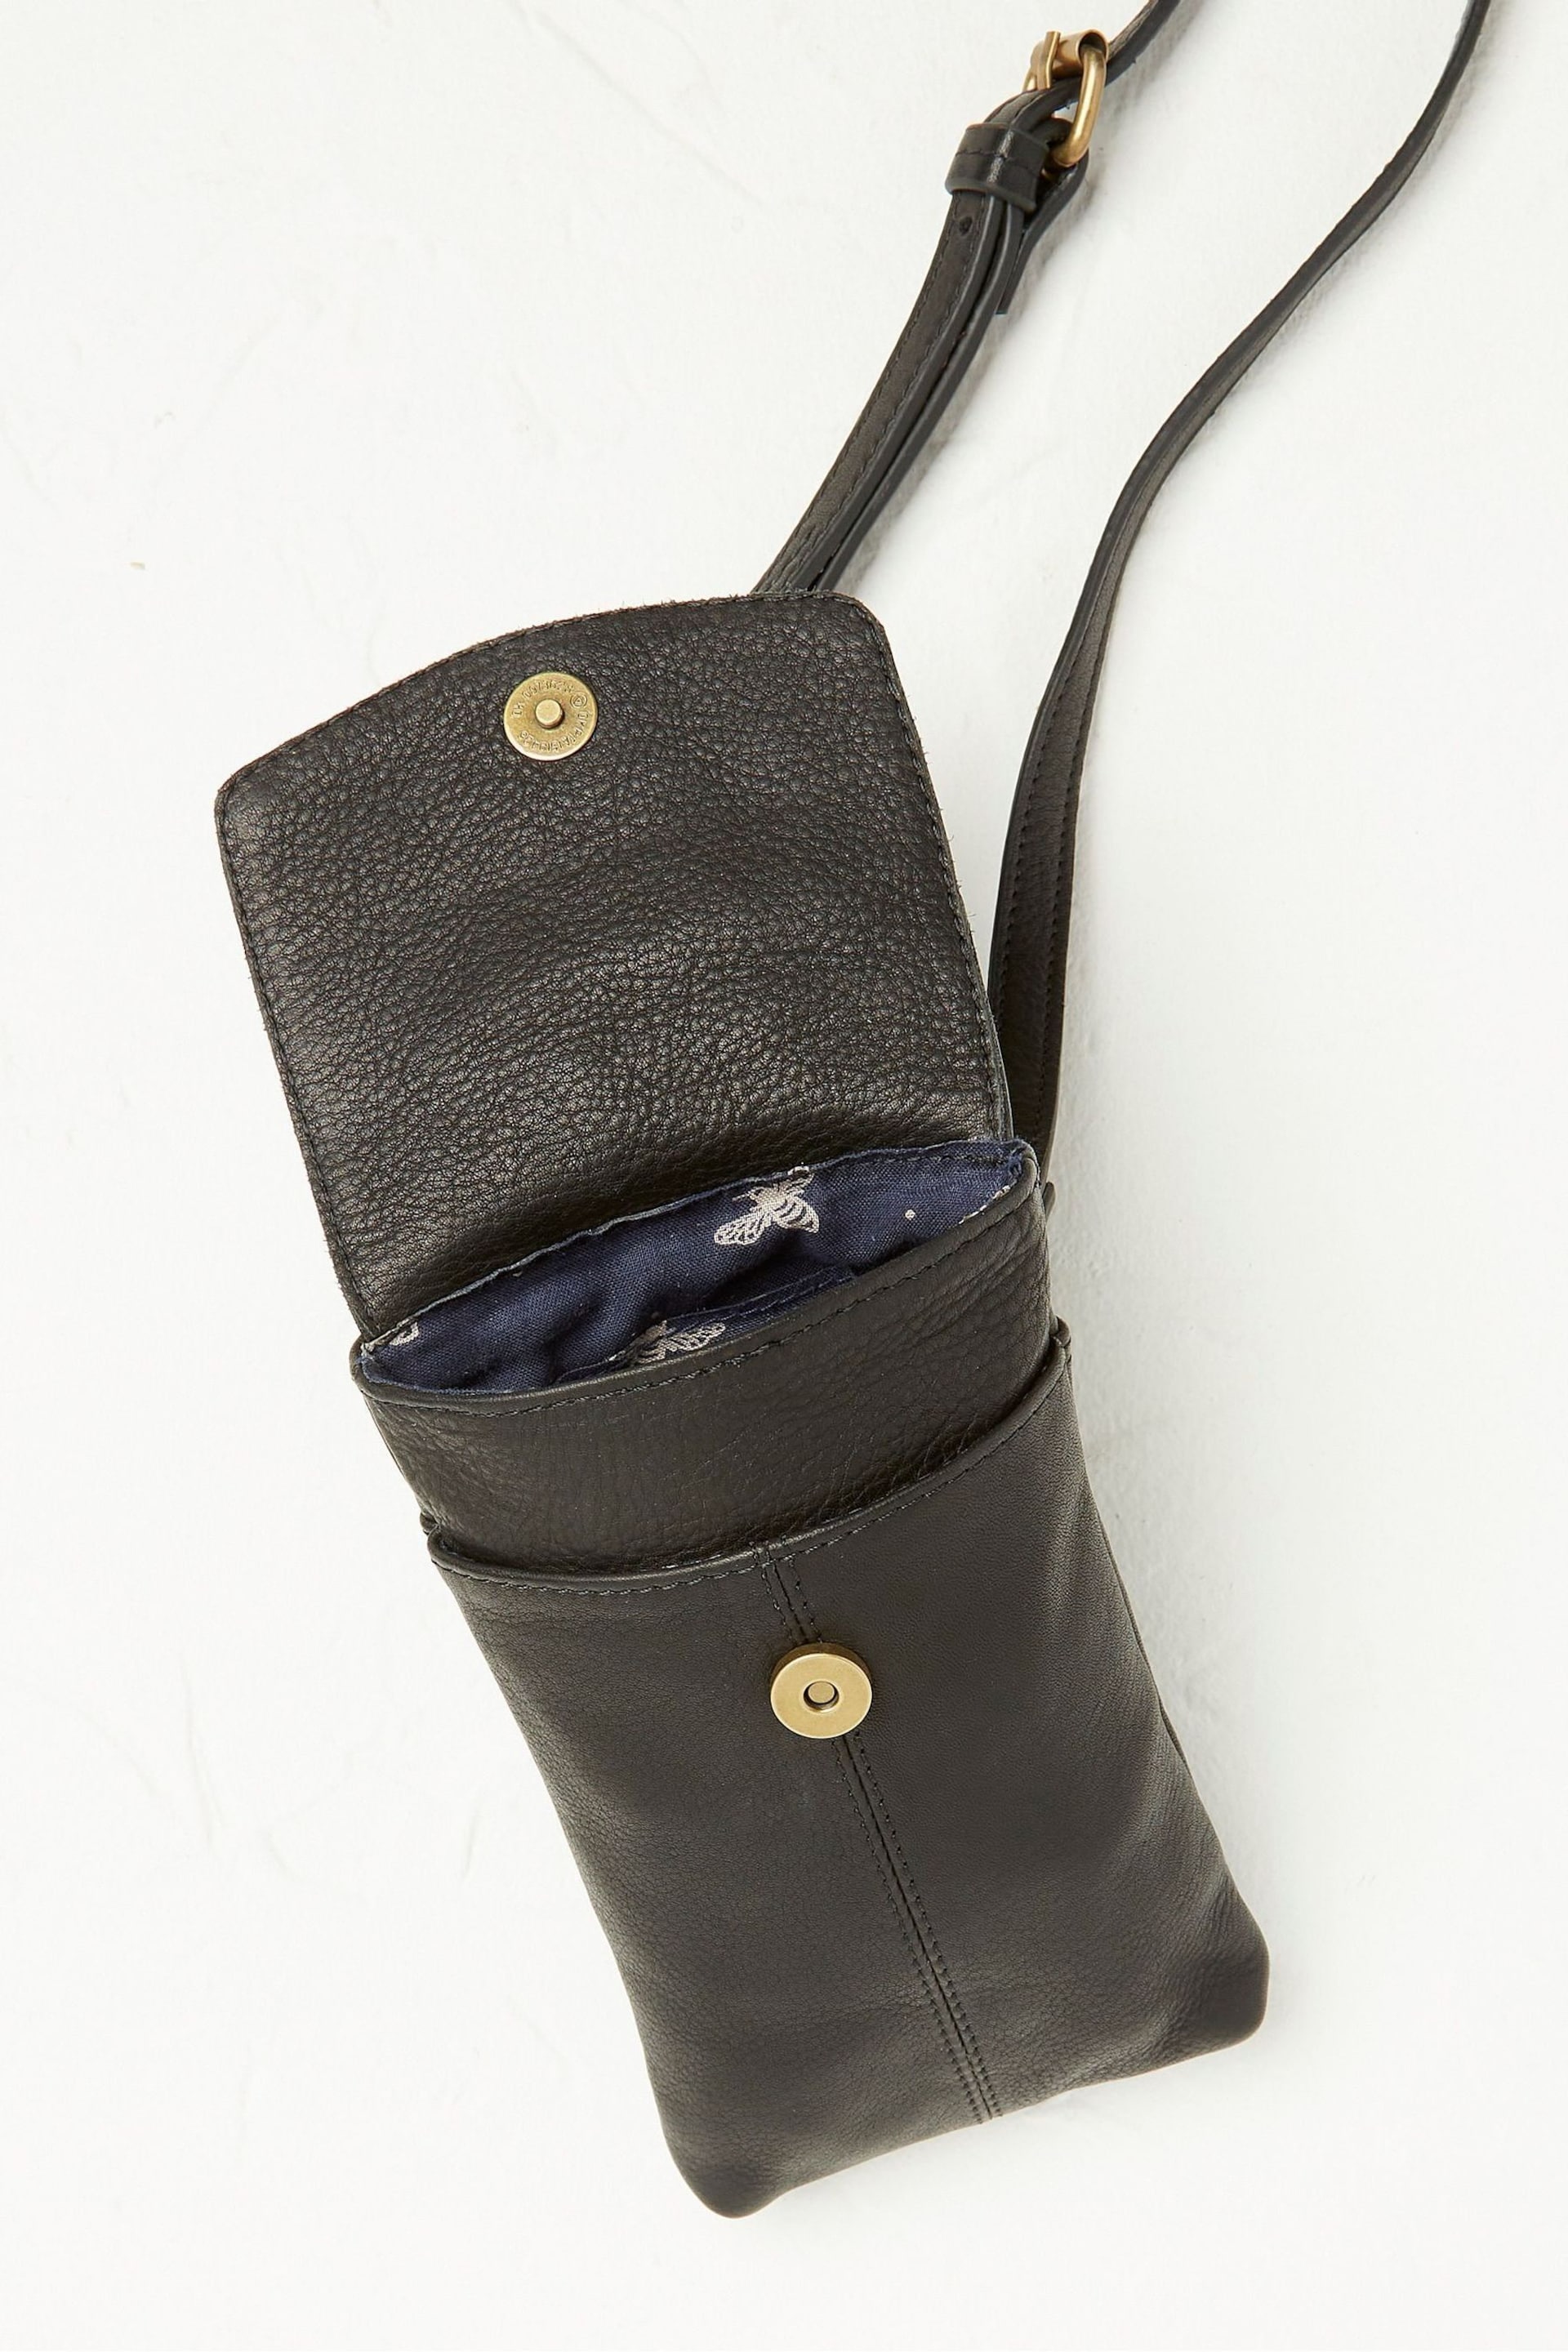 FatFace Black Bronte Bee Phone Bag - Image 4 of 4